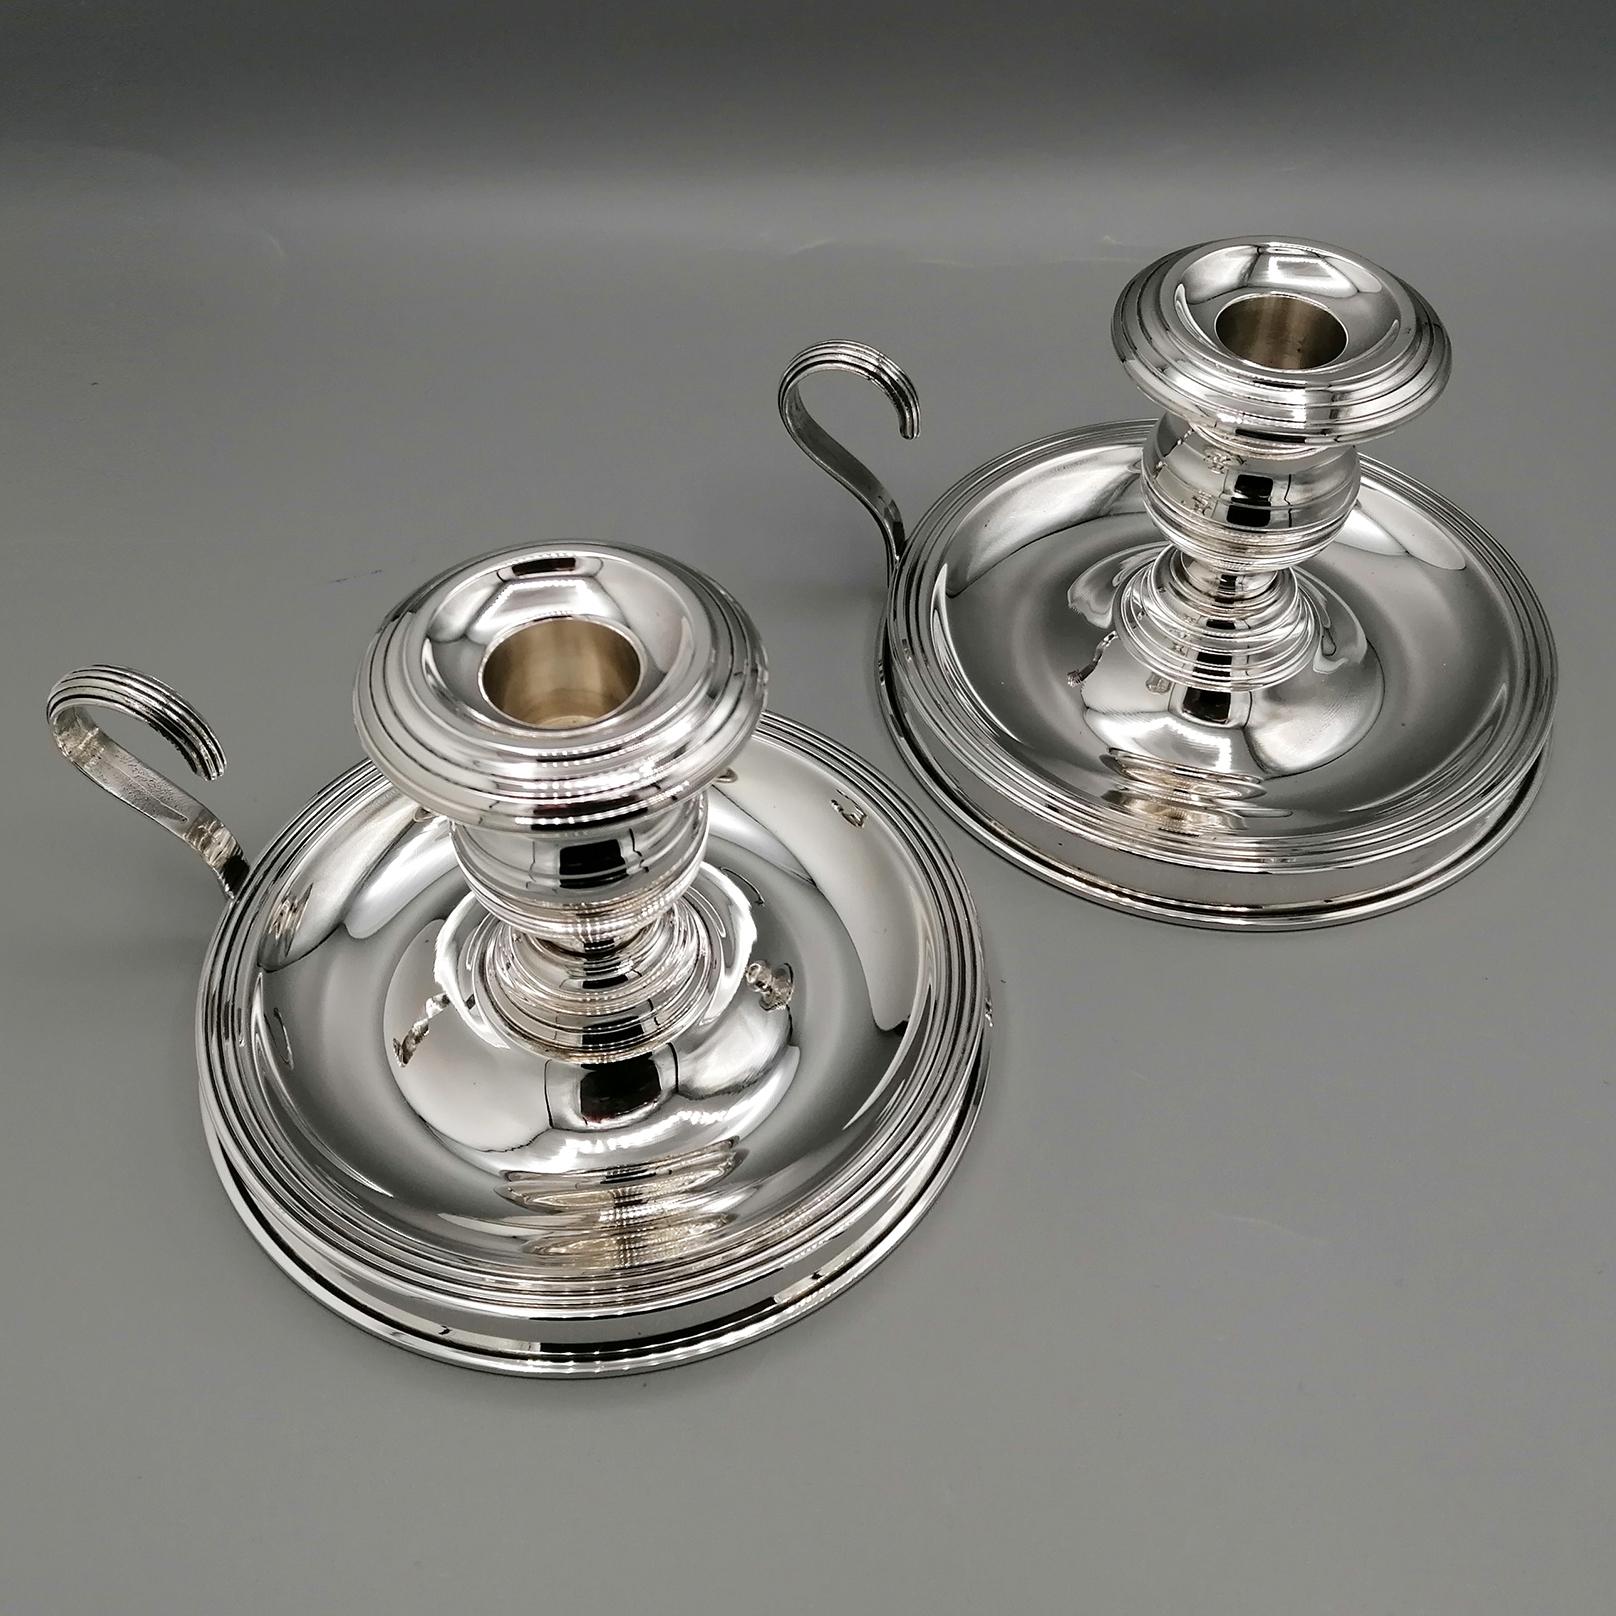 Forged XX° Century Italian Sterling Silver Pair of Chamberscticks For Sale